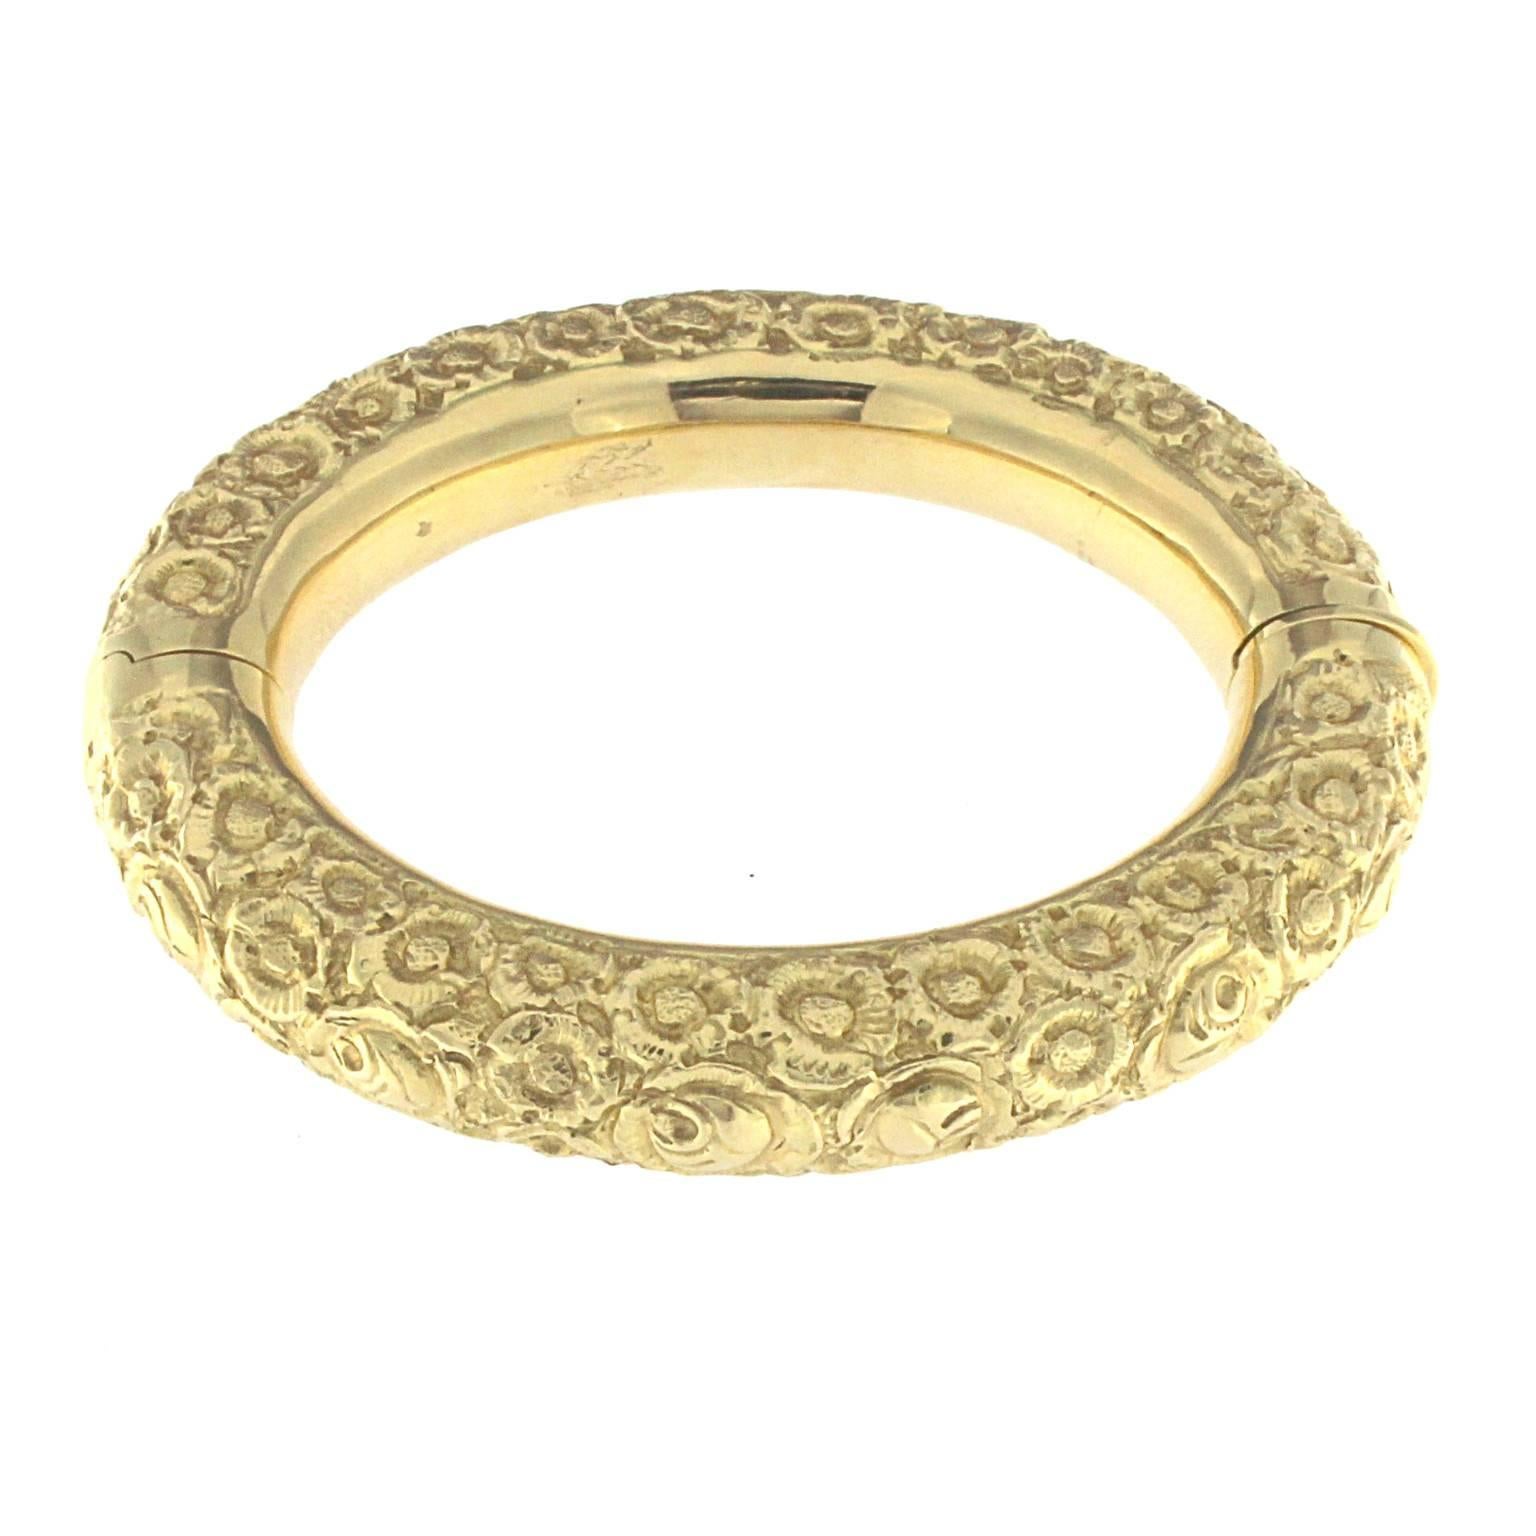 Gorgeous bracelet molded to the art to better adhere to the oval anatomy of the woman's wrist, embellished by hand chiseling. This bracelet is part of the Roserosse collection
The chiseling is an almost disappearing ancient art of fully manual